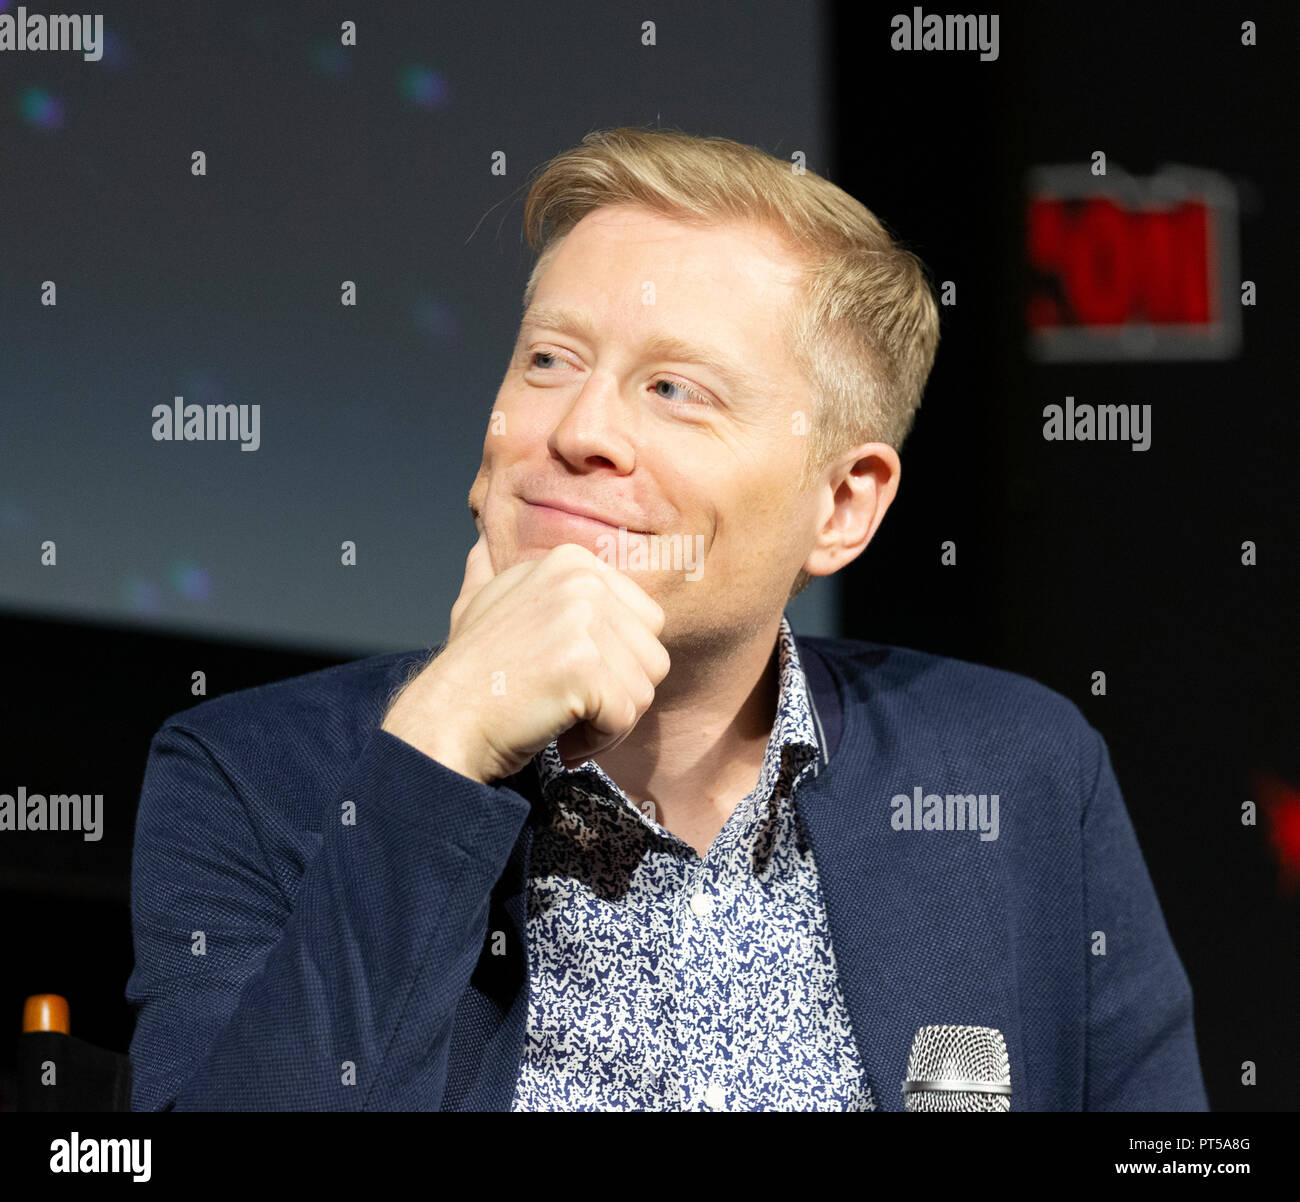 New York, NY - October 6, 2018: Anthony Rapp attends Star Trek: Discovery panel during New York Comic Con at Hulu Theater at Madison Square Garden Credit: lev radin/Alamy Live News Stock Photo